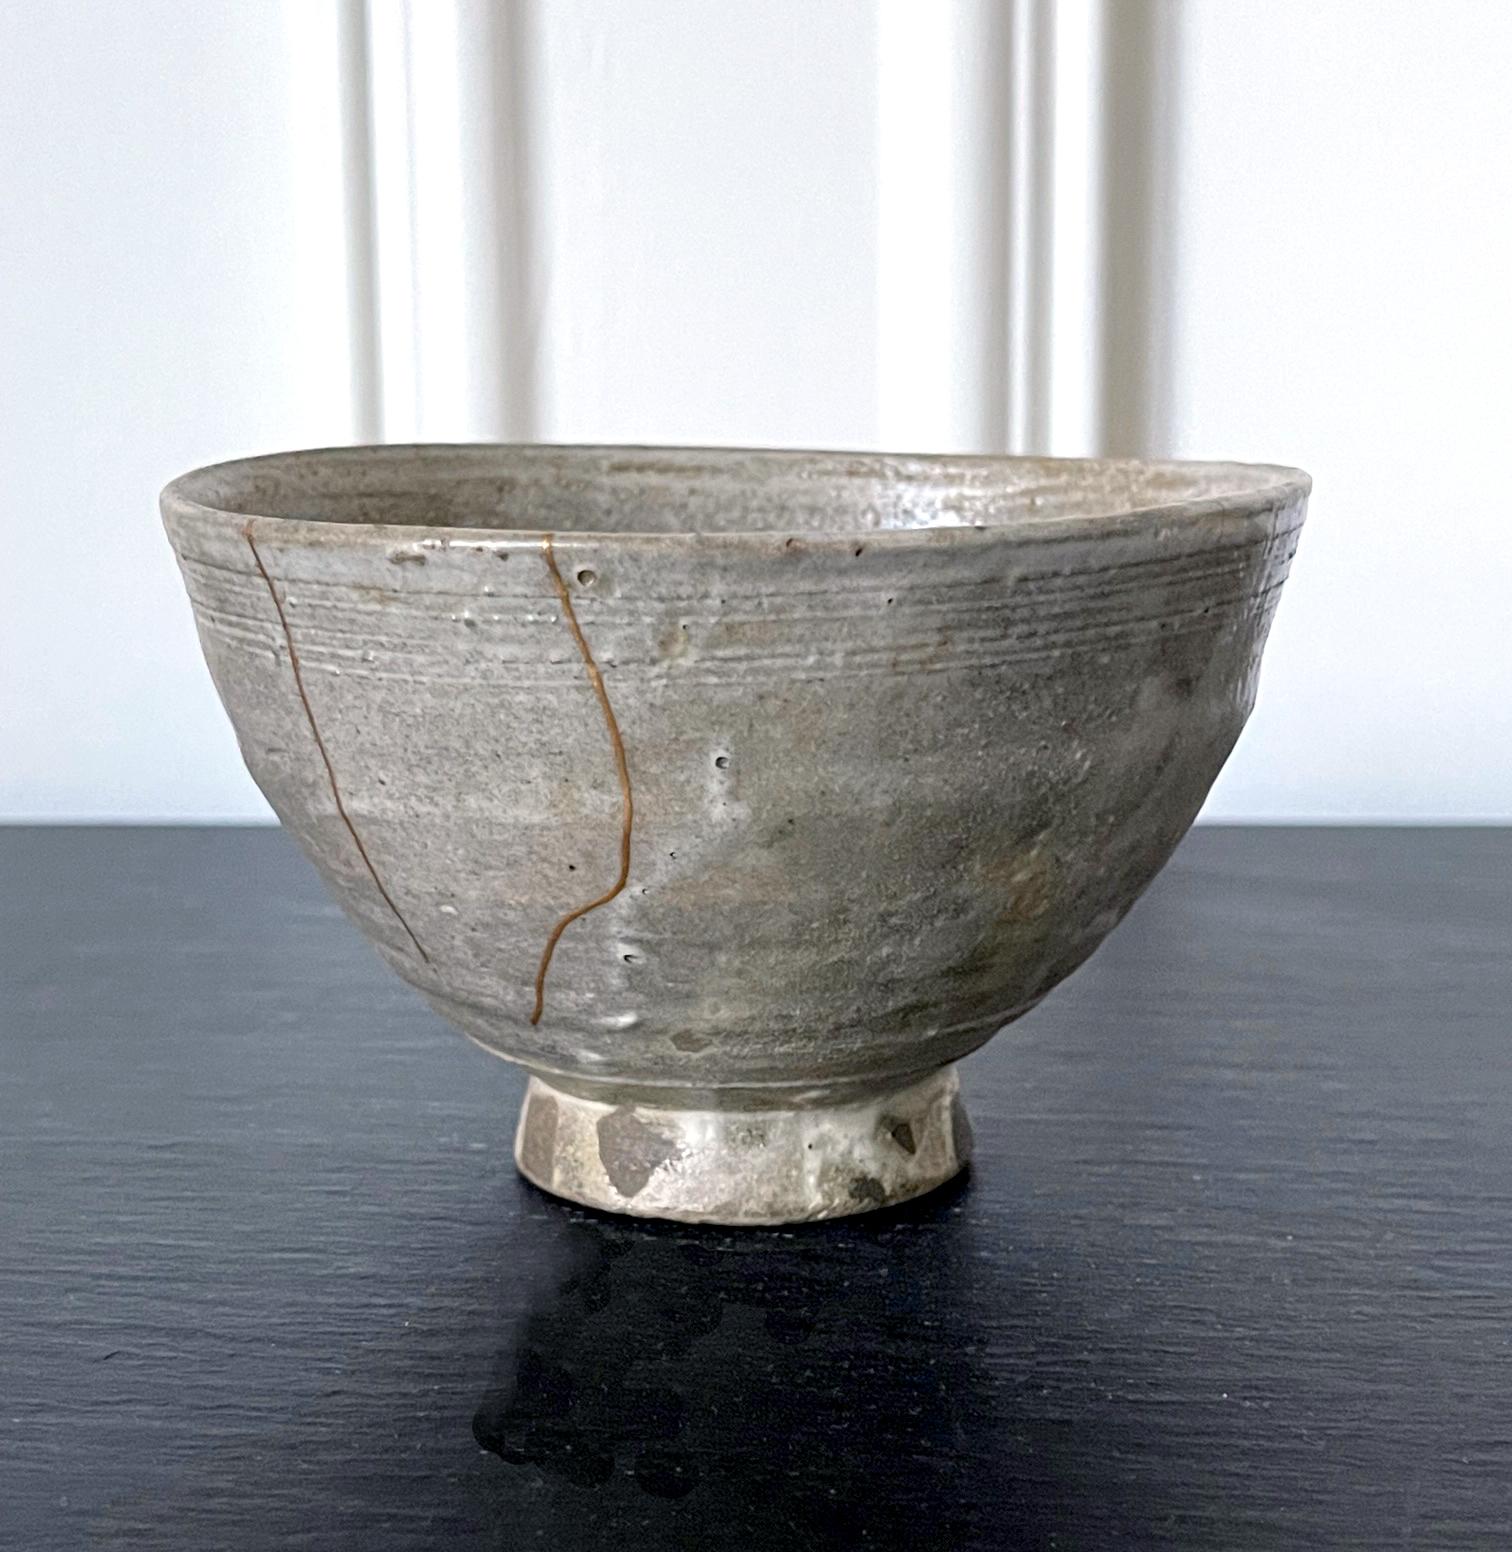 A ceramic chawan (tea bowl) circa 17-18th century fired in the Busan kiln in Korean specifically for the Japanese market. The kilns were run by the So clan that ruled Tsushima Island to fill the order from Japan with detailed preference. Gohon